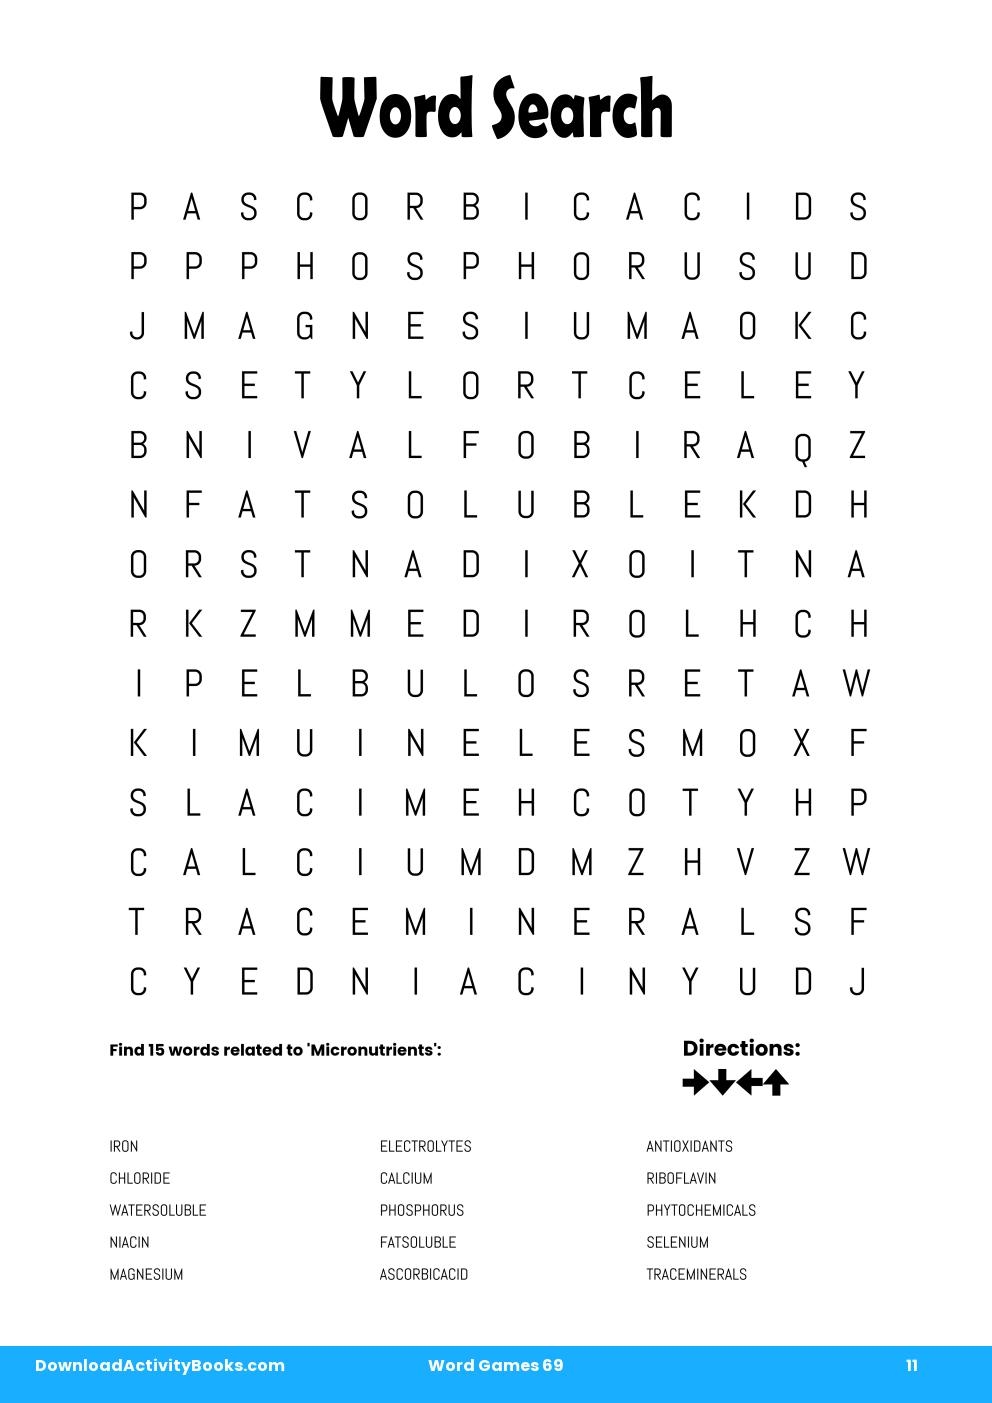 Word Search in Word Games 69